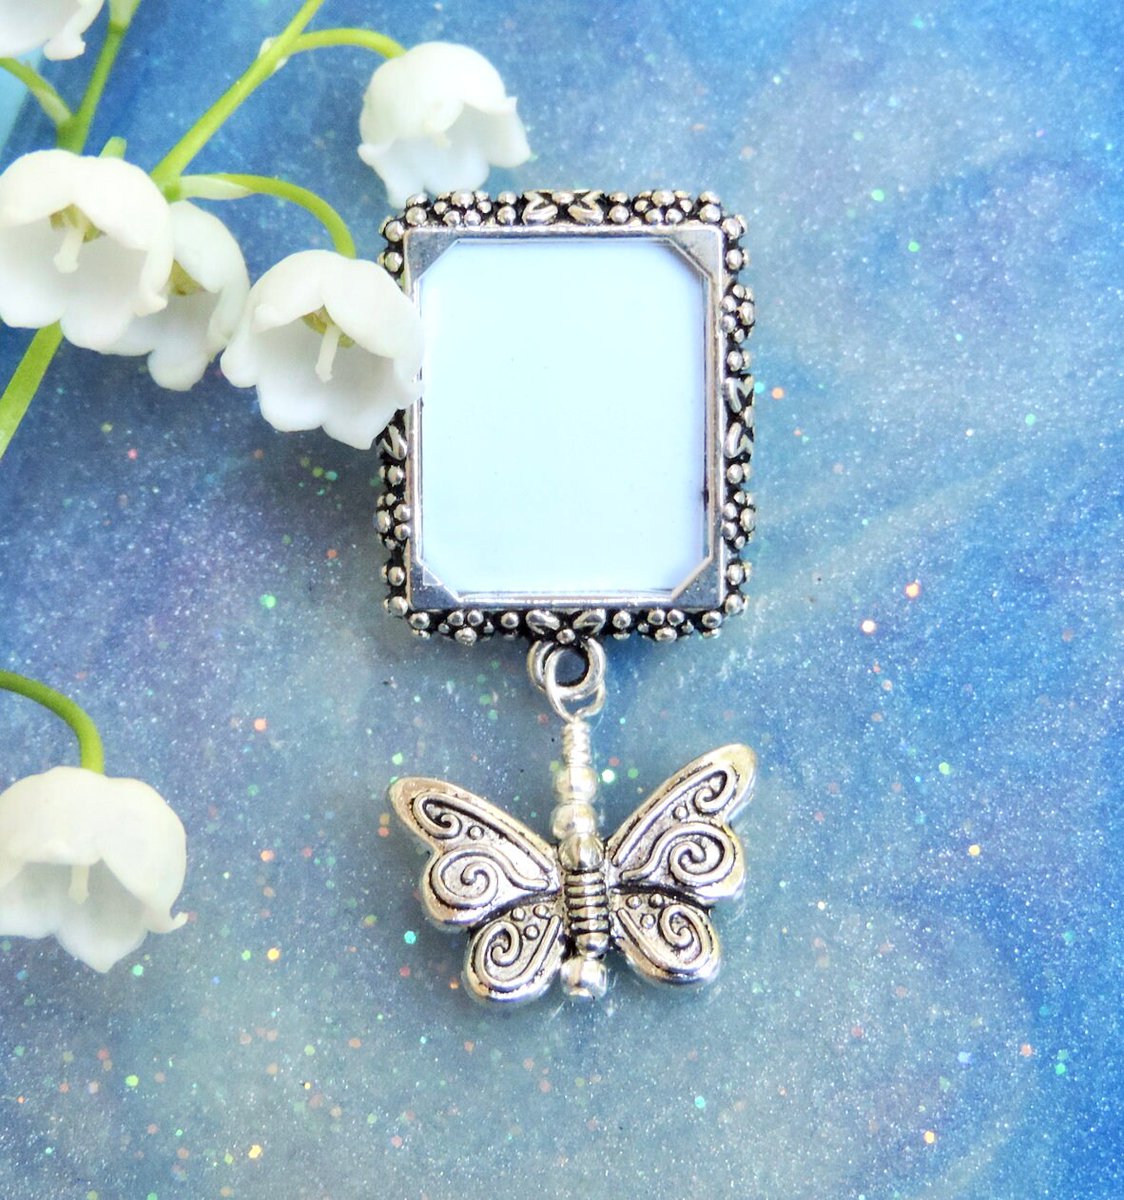 RT @smilingbluedog: Excited to share the latest addition to my #etsy shop: Memorial photo lapel pin with a butterfly and small picture frame. etsy.me/3w8Hgnj @Etsy #etsyseller #bestofetsy #etsymntt #promomyshop #etsysocial #wedding #graduation #…